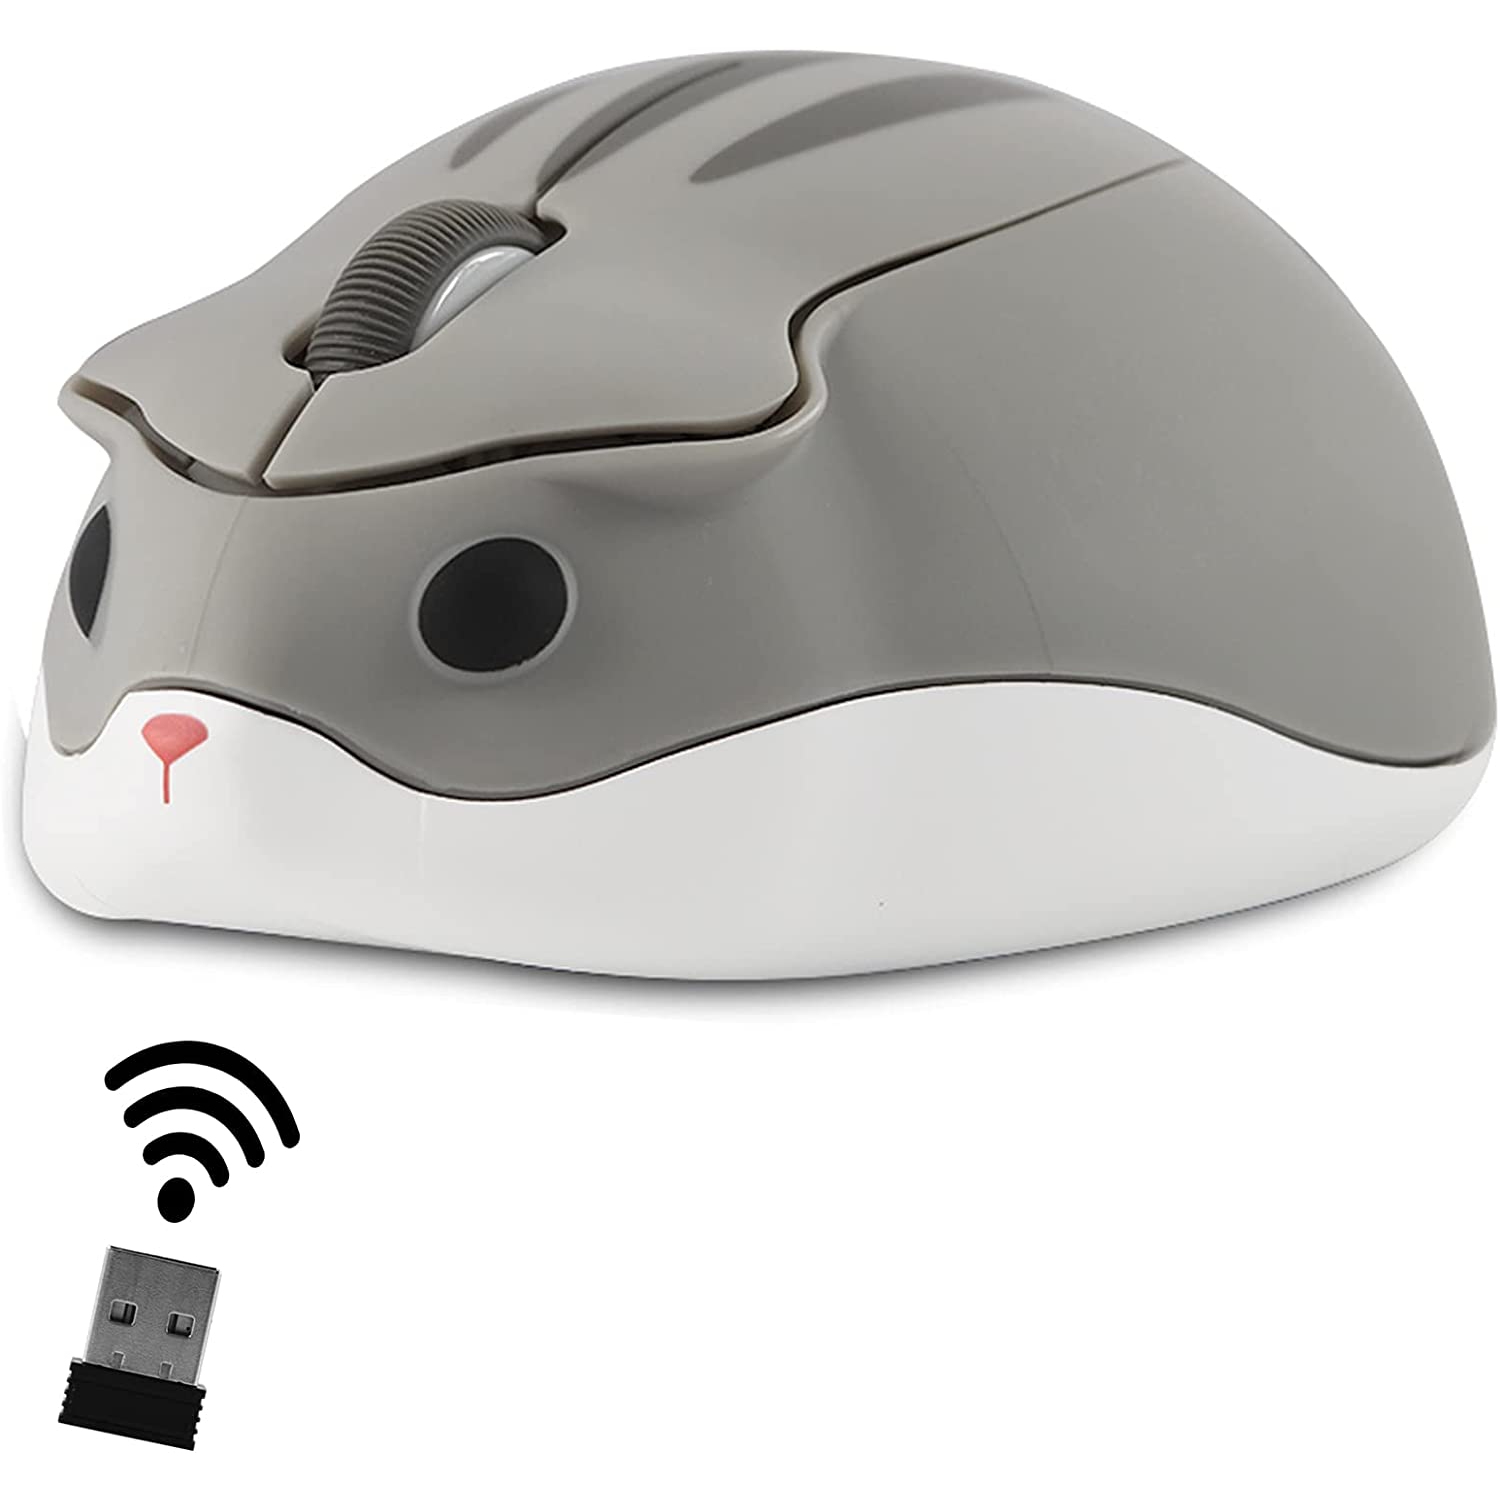 Wireless Mouse Cute Hamster Shaped Computer Mouse 1200DPI Less Noice Portable USB Mouse Cordless Mouse for PC Laptop Computer Notebook MacBook Kids Gift (Gray)